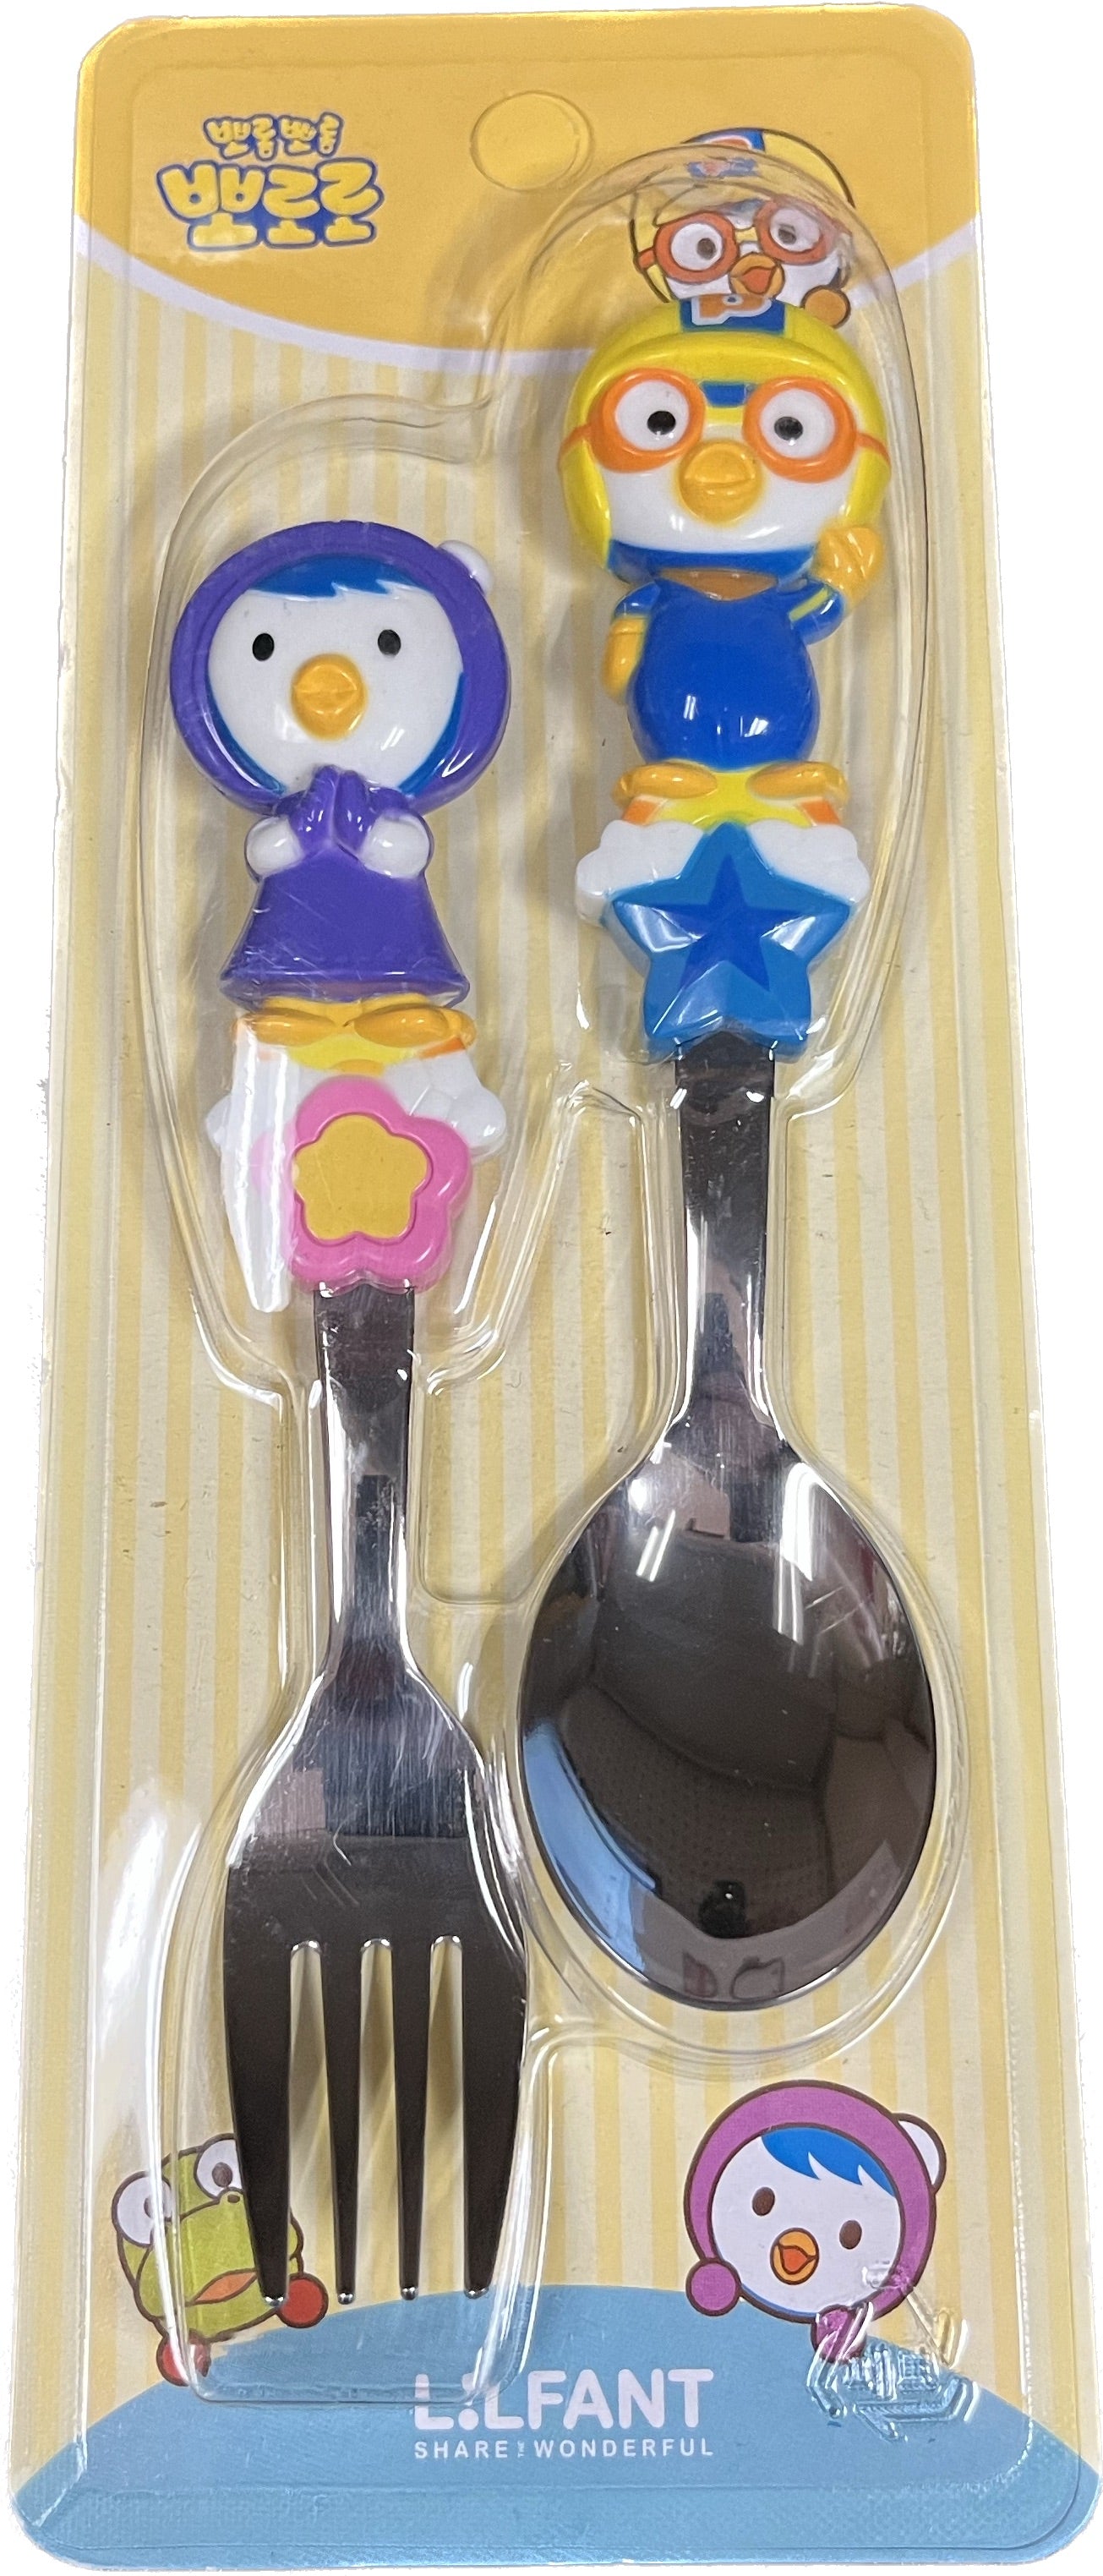 Lilfant Pororo Stainless Steel Spook and Fork Set